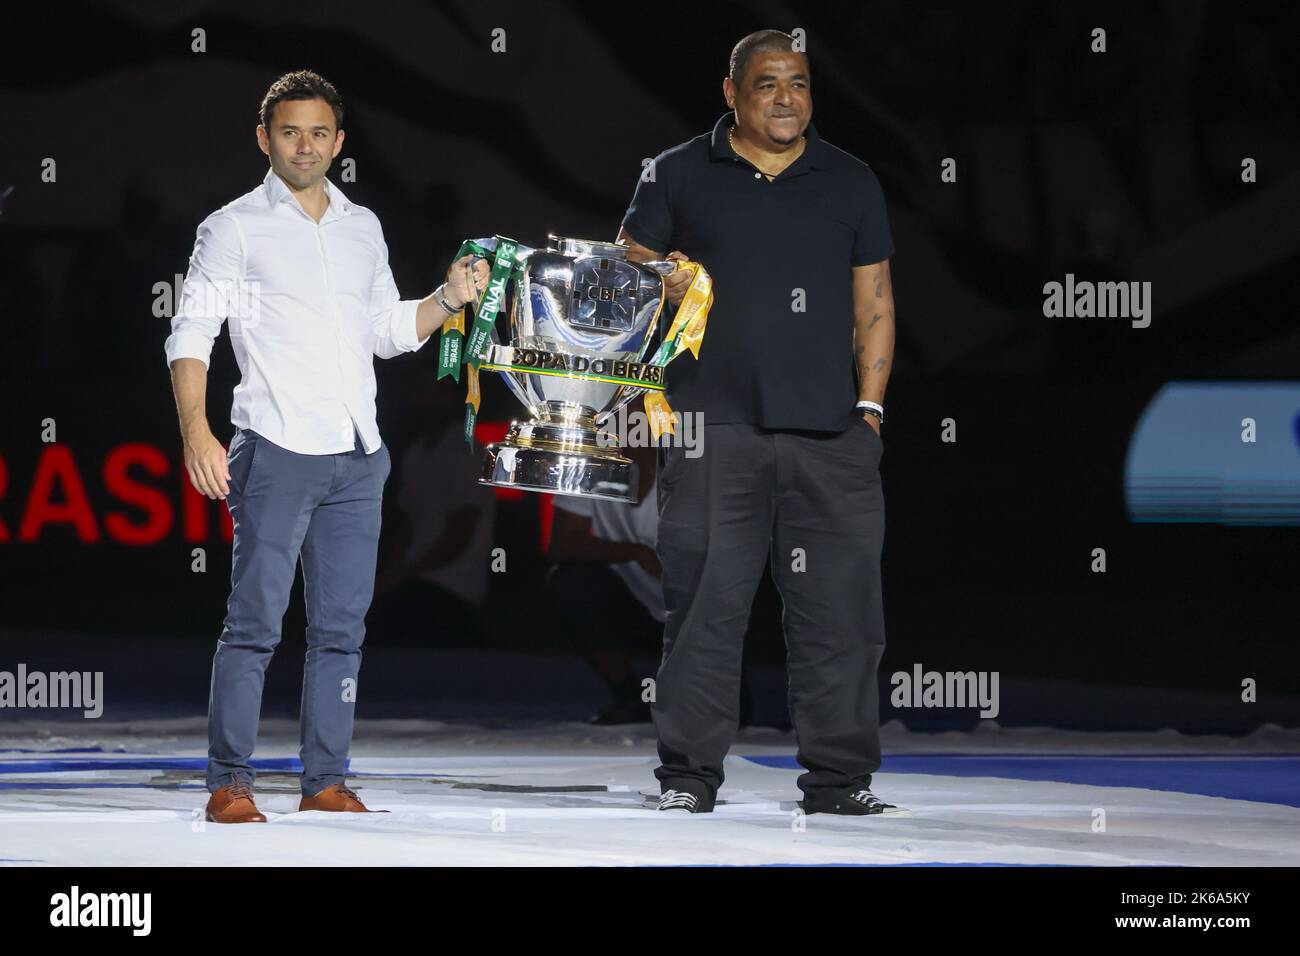 Sao Paulo, Brazil. 12th Oct, 2022. SP - Sao Paulo - 10/12/2022 - COPA DO BRASIL 2022 FINAL, CORINTHIANS X FLAMENGO - Vampeta former player with the cup before the match between Corinthians and Flamengo at the Arena Corinthians stadium for the Copa do Brasil 2022 championship. Photo: Marcello Zambrana /AGIF/Sipa USA Credit: Sipa USA/Alamy Live News Stock Photo